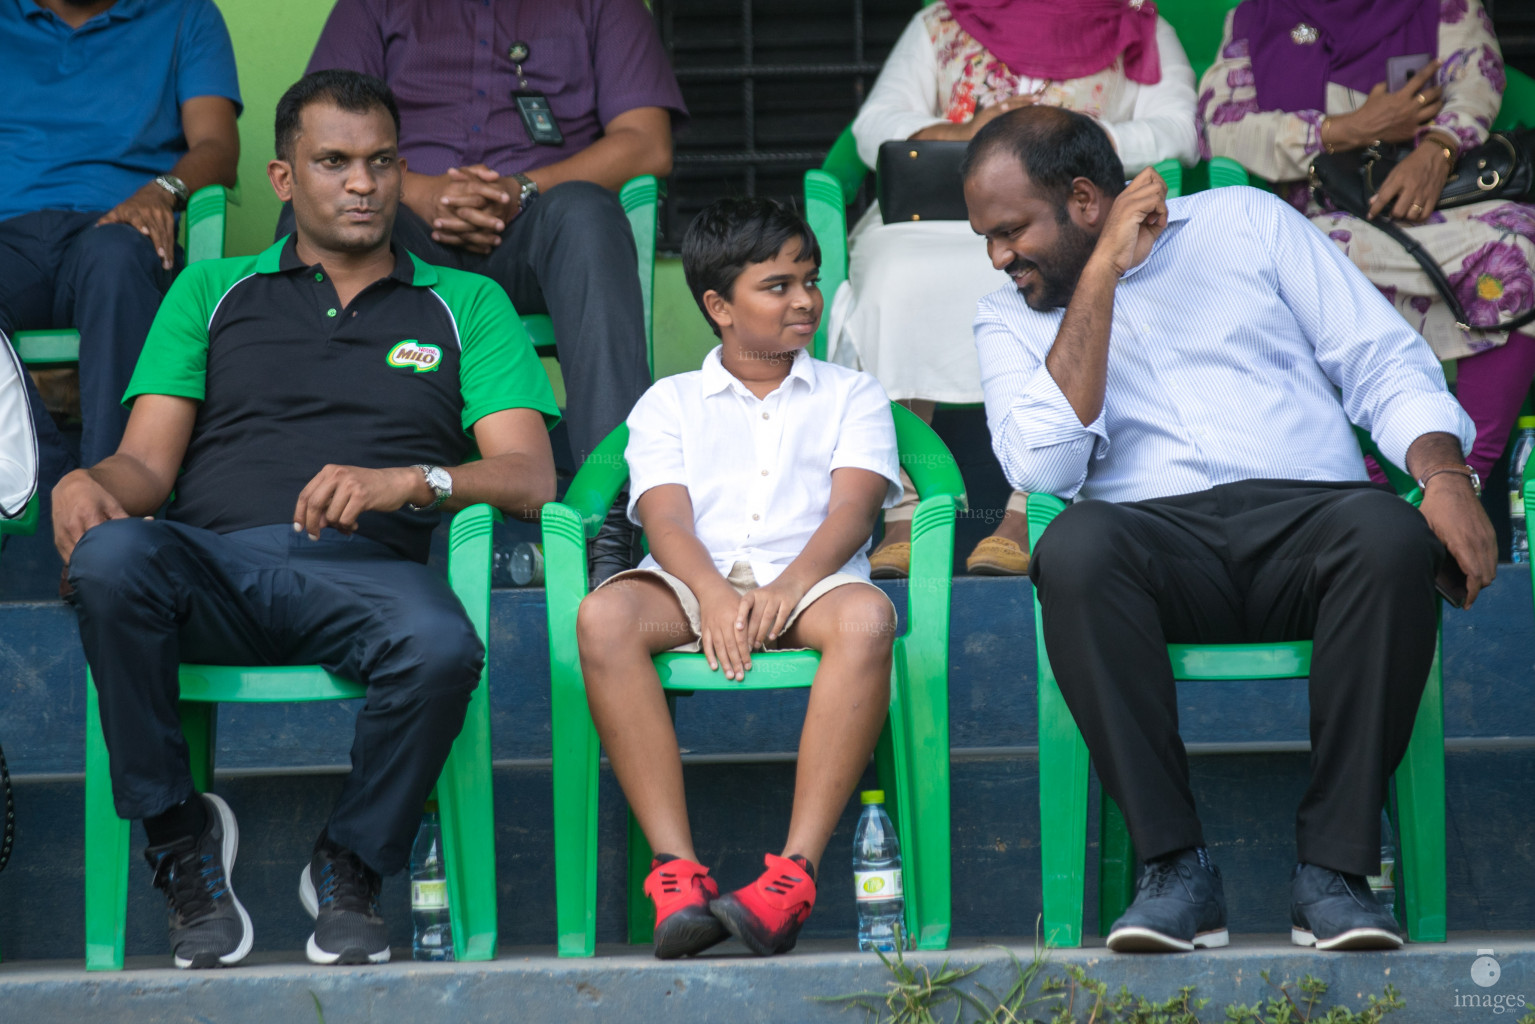 Opening Ceremony of Milo Kids Football Fiesta in Henveiru Grounds in Male', Maldives, Wednesday, Fe20uary 19th 2019 (Images.mv Photo/Suadh Abdul Sattar)